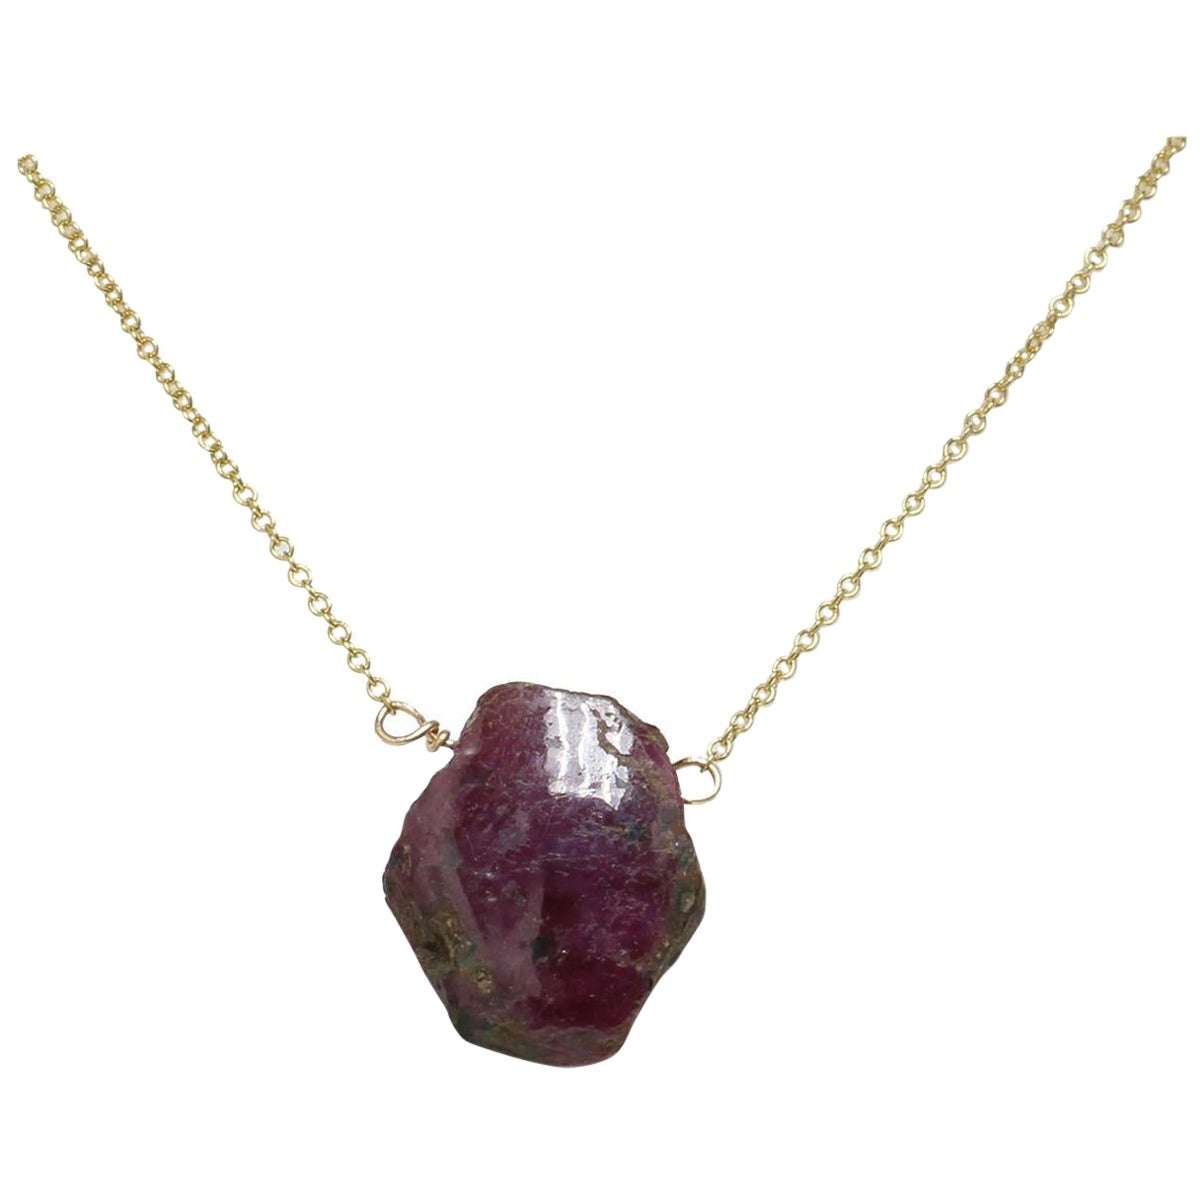 14K Gold Ruby Slice Necklace, Adjustable Chain, Unique Statement Jewelry, modern For Sale